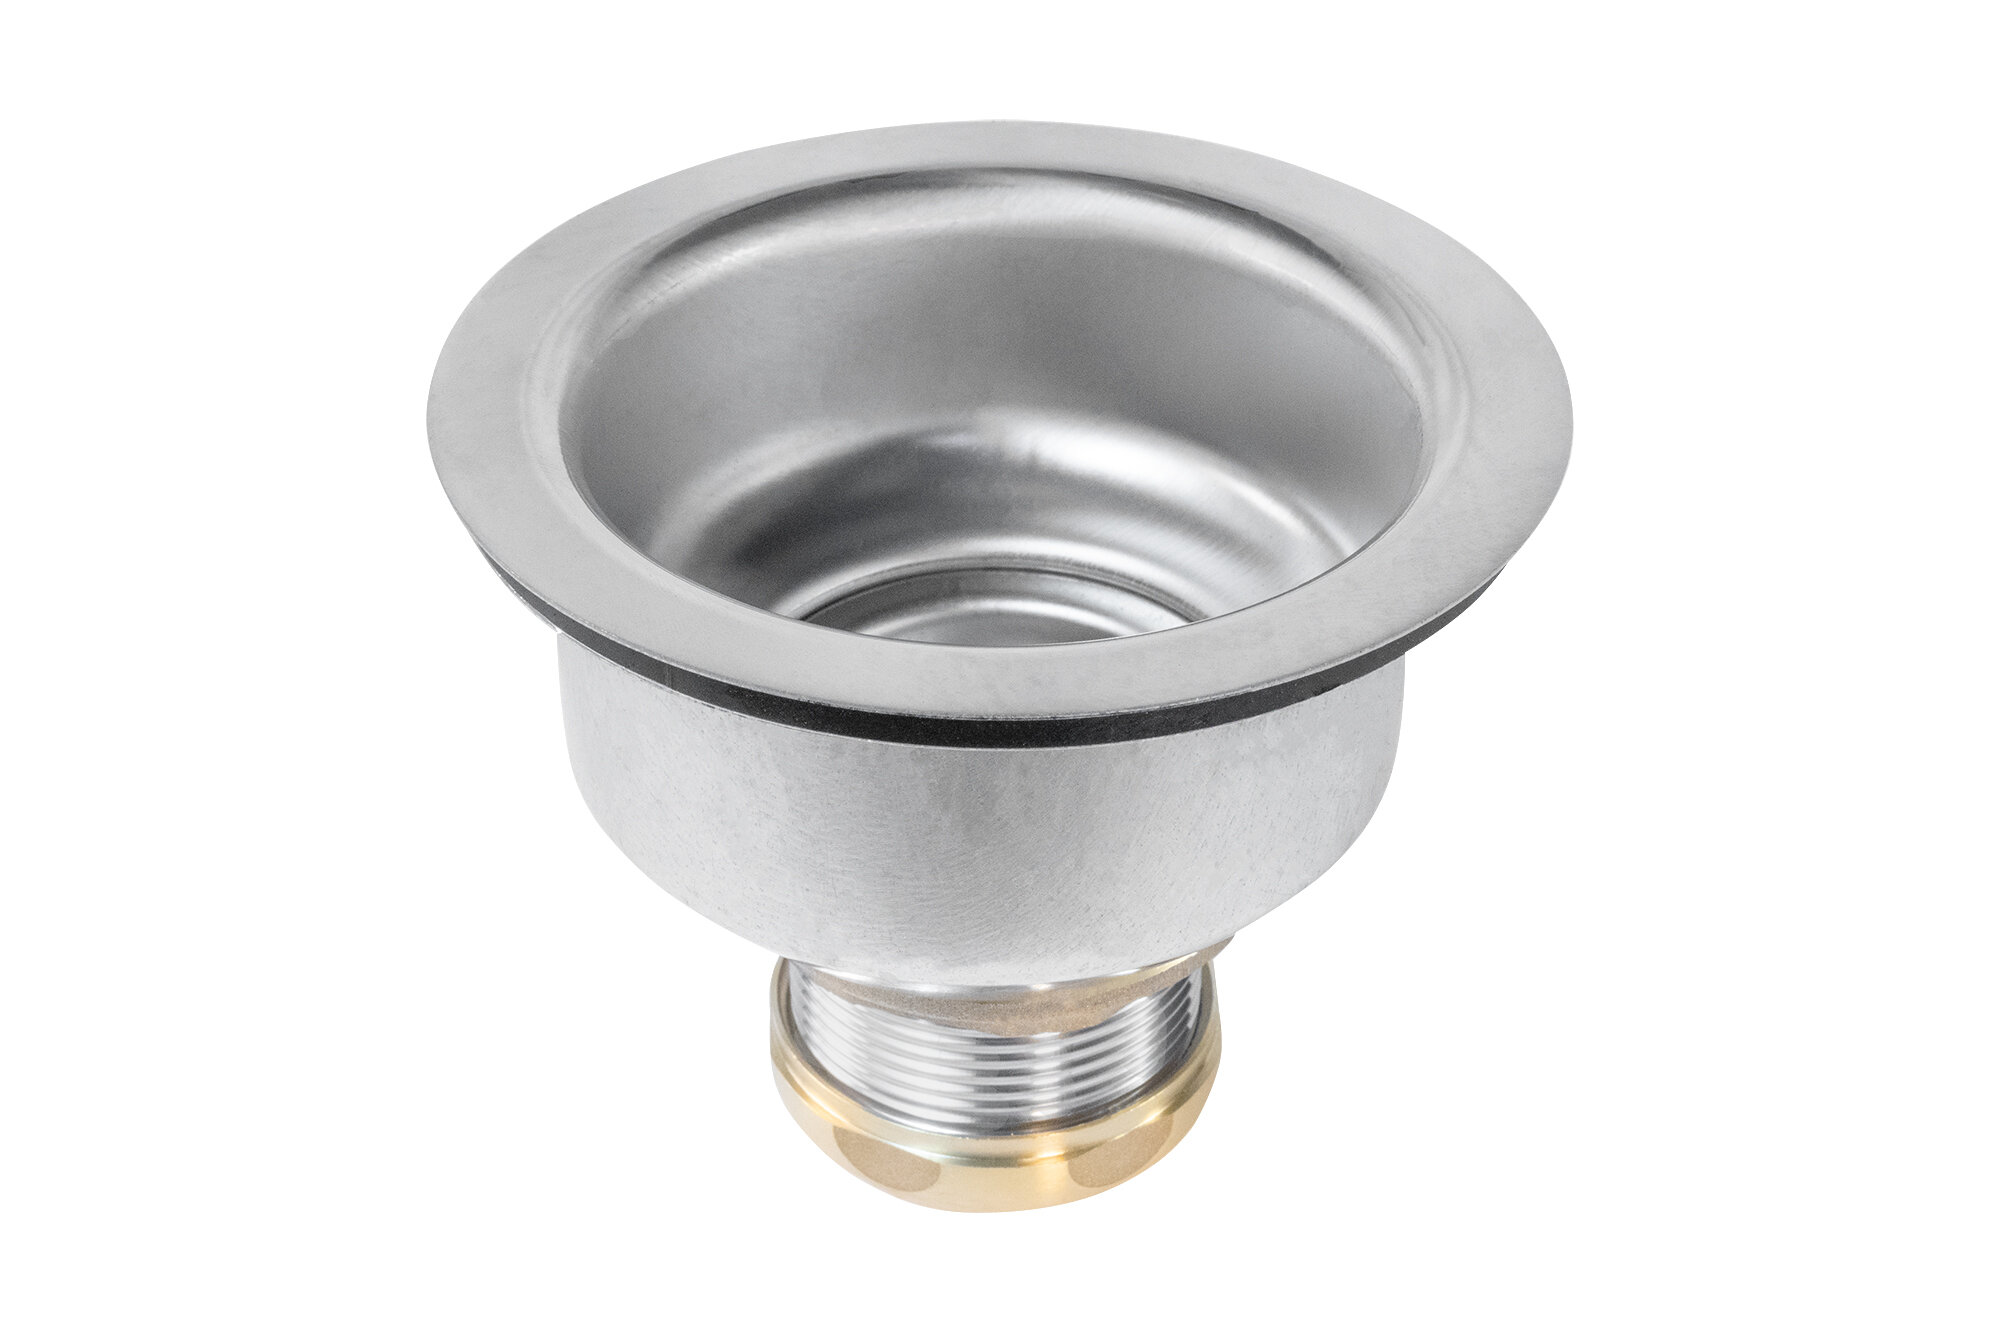 Long Shank Strainer Basket Sink Drain with Lift-Style Stopper - 3 1/2